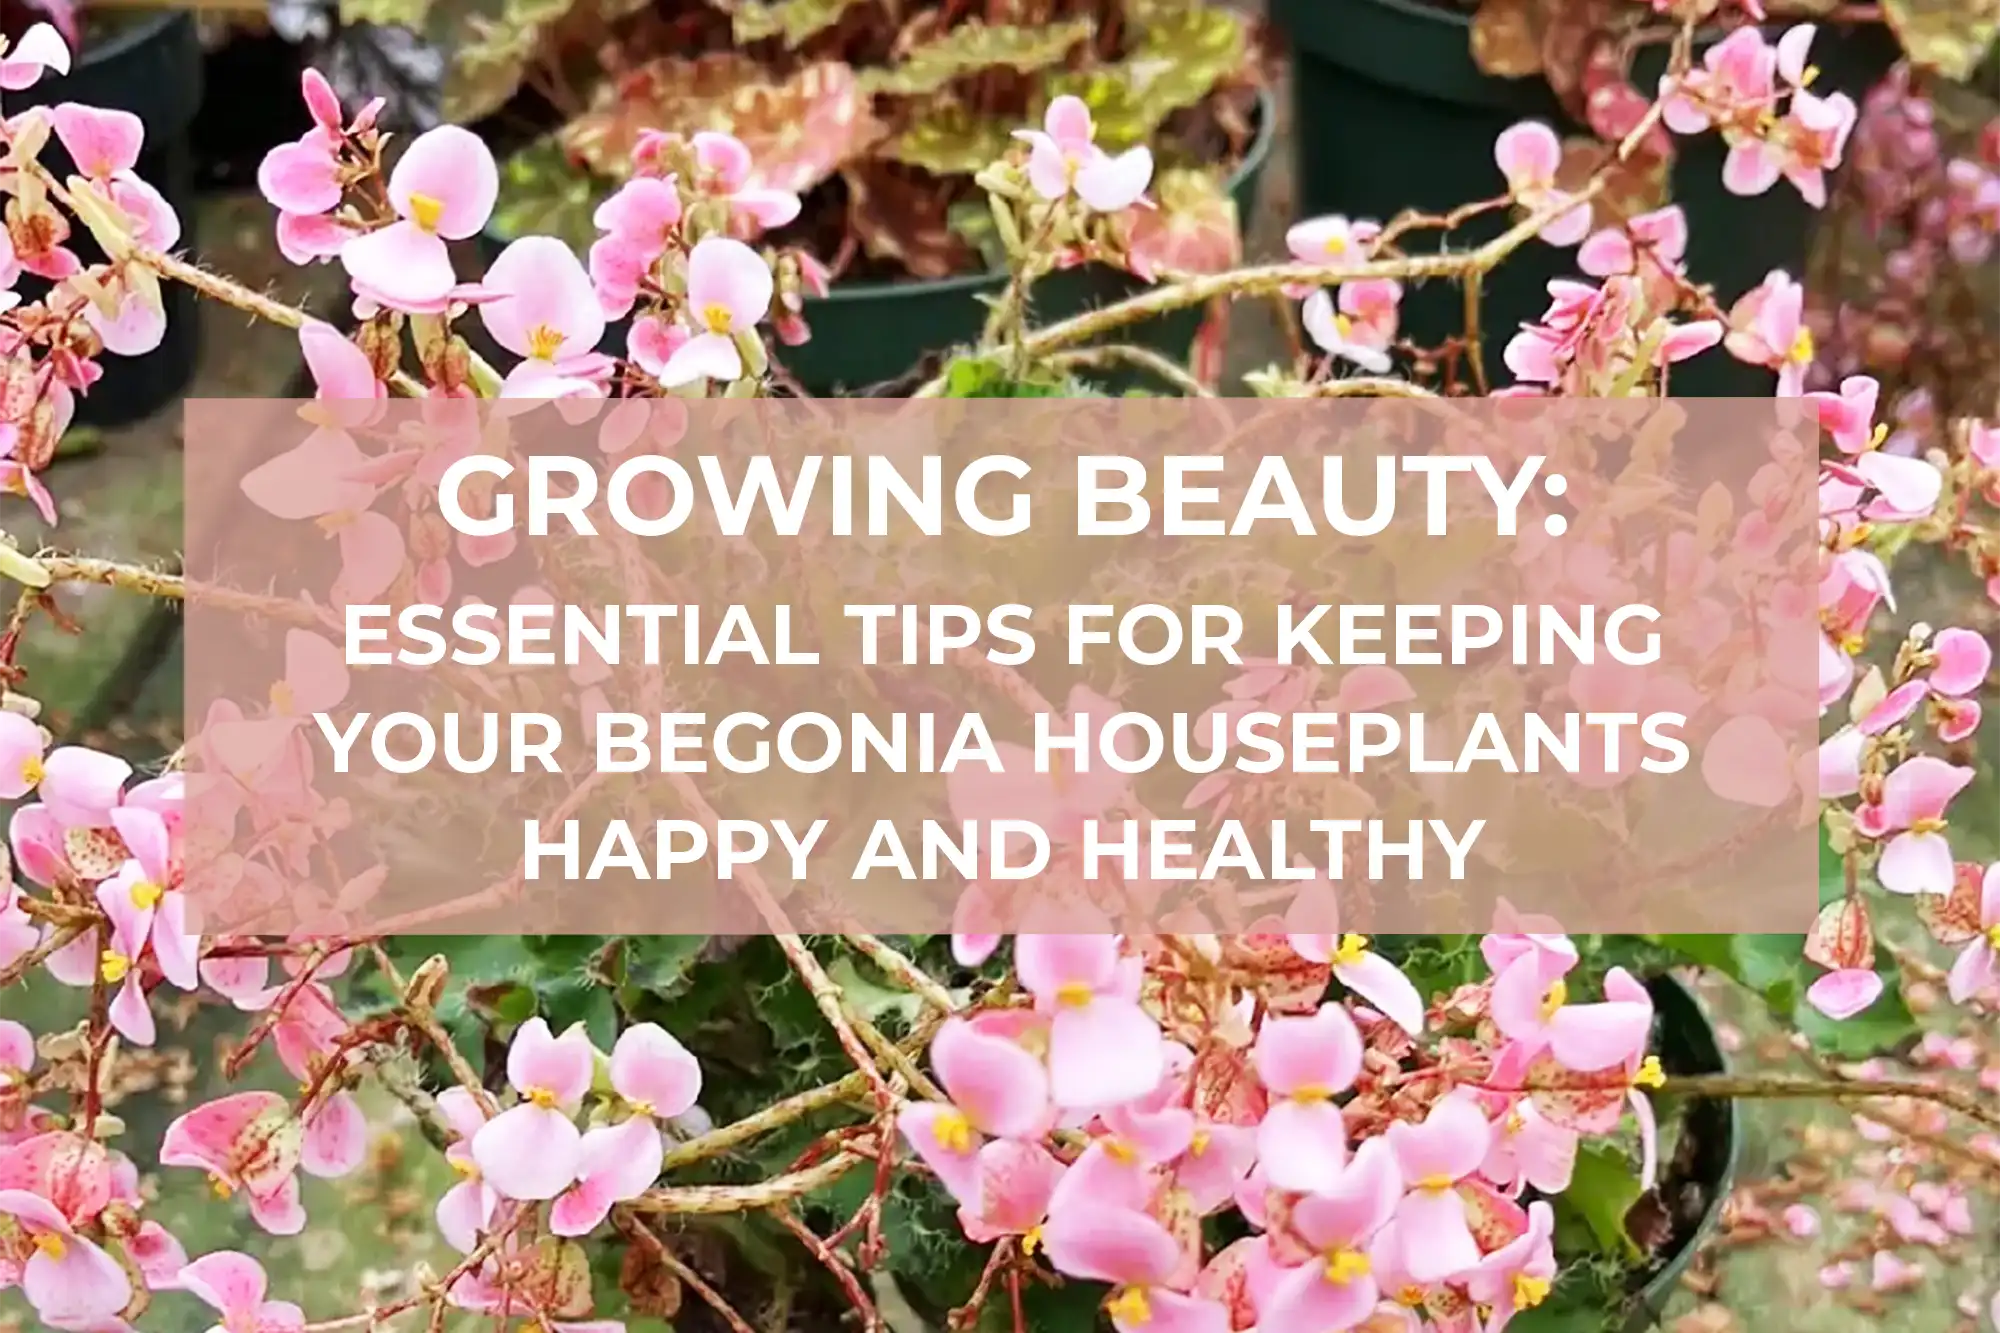 Growing Beauty: Essential Tips for Keeping Your Begonia Houseplants Happy and Healthy